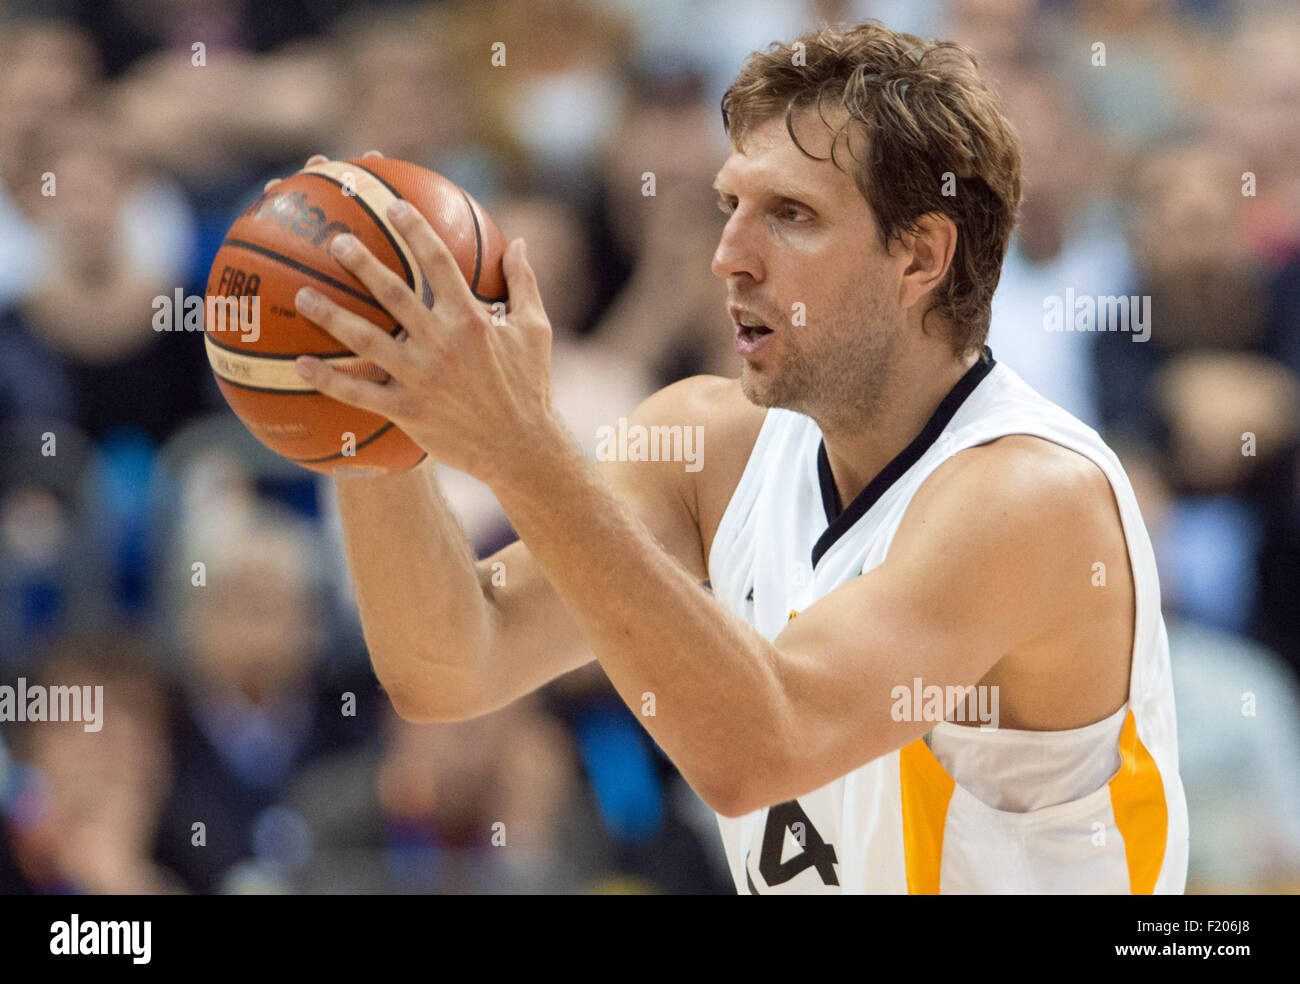 Berlin, Germany. 08th Sep, 2015. Germany's Dirk Nowitzki in action during the FIBA EuroBasket 2015 Group B match between Germany and Turkey, at the Mercedes-Benz-Arena in Berlin, Germany, 08 September 2015. Germany lost 75:80. Photo: Lukas Schulze/dpa/Alamy Live News Stock Photo